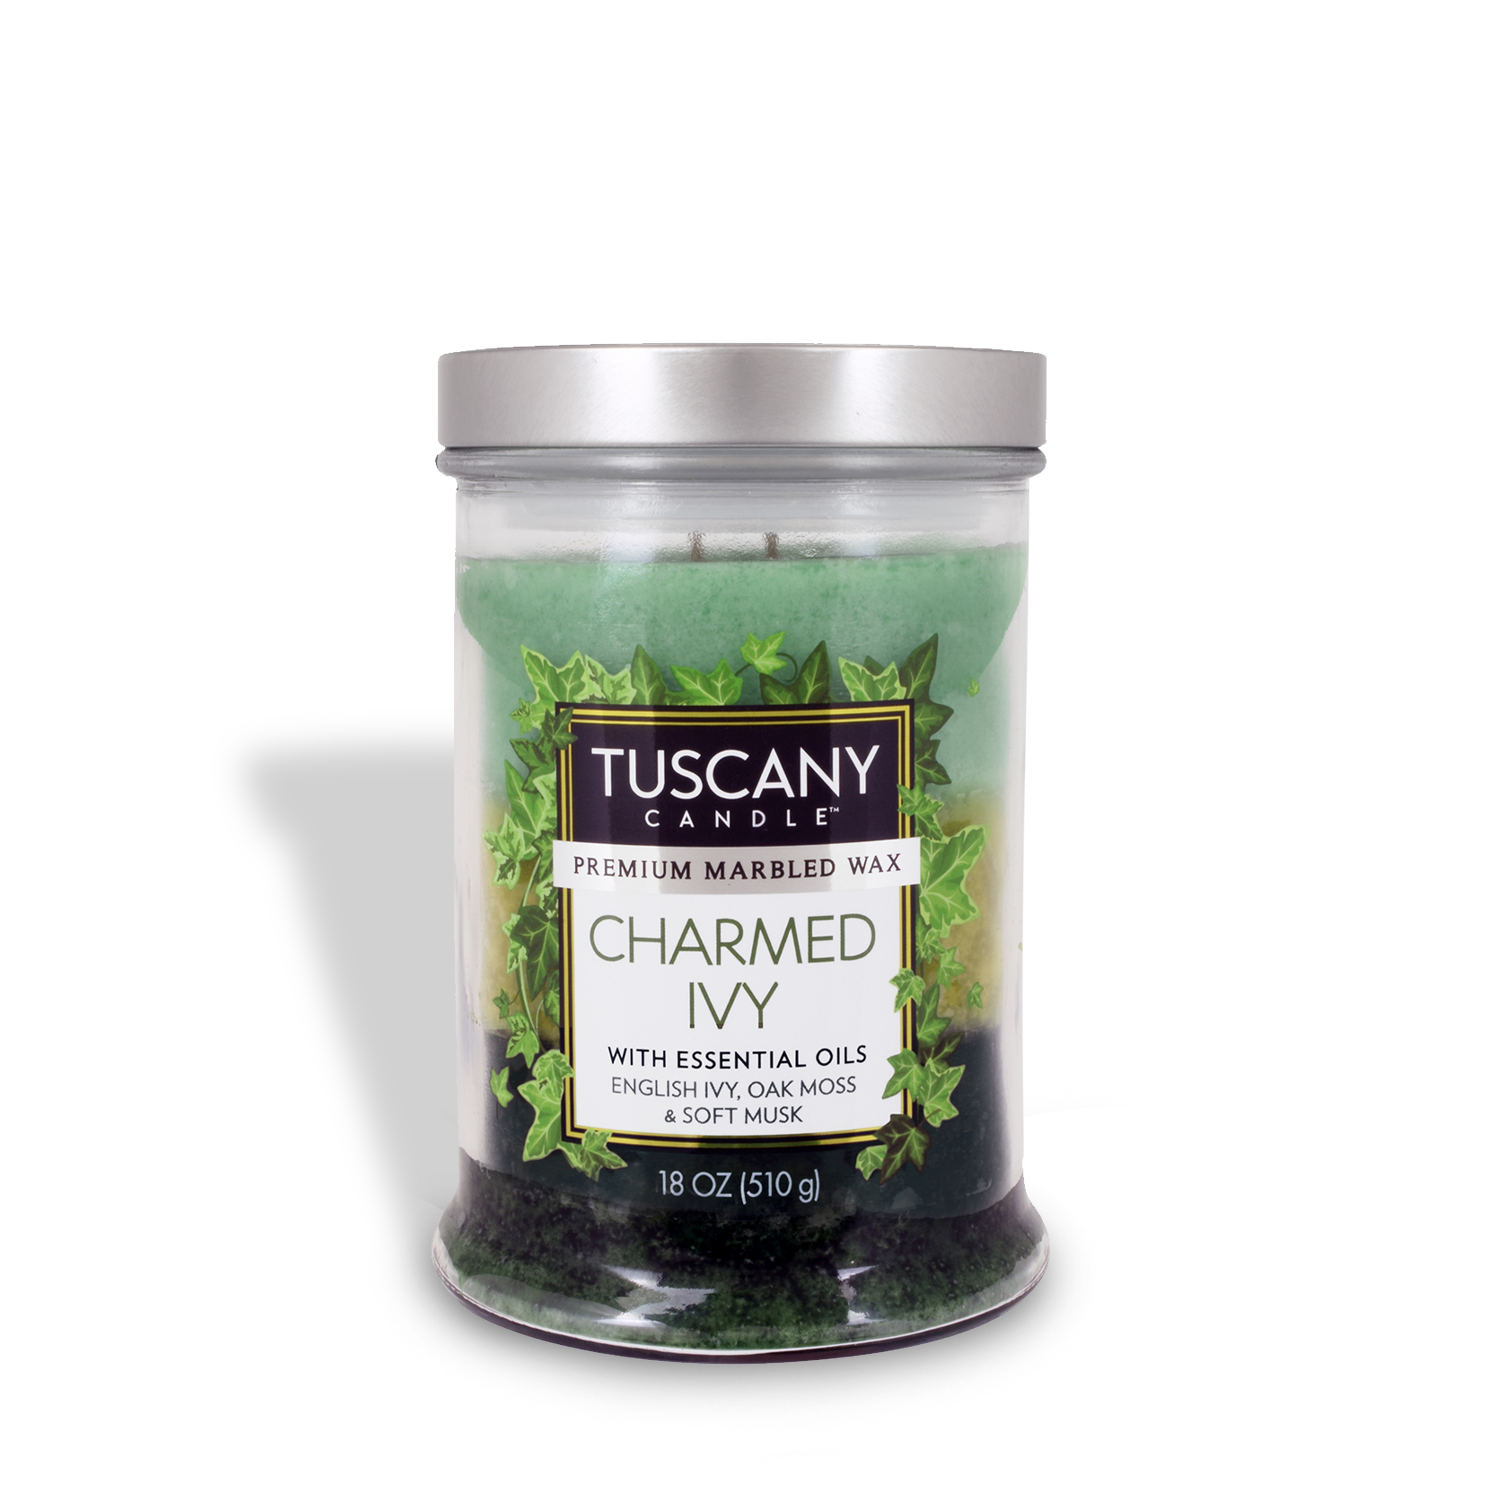 A green marbled Tuscany Candle® EVD Charmed Ivy Long-Lasting Scented Jar Candle (18 oz) containing essential oils, English ivy, oak moss, and soft musk in a clear jar.